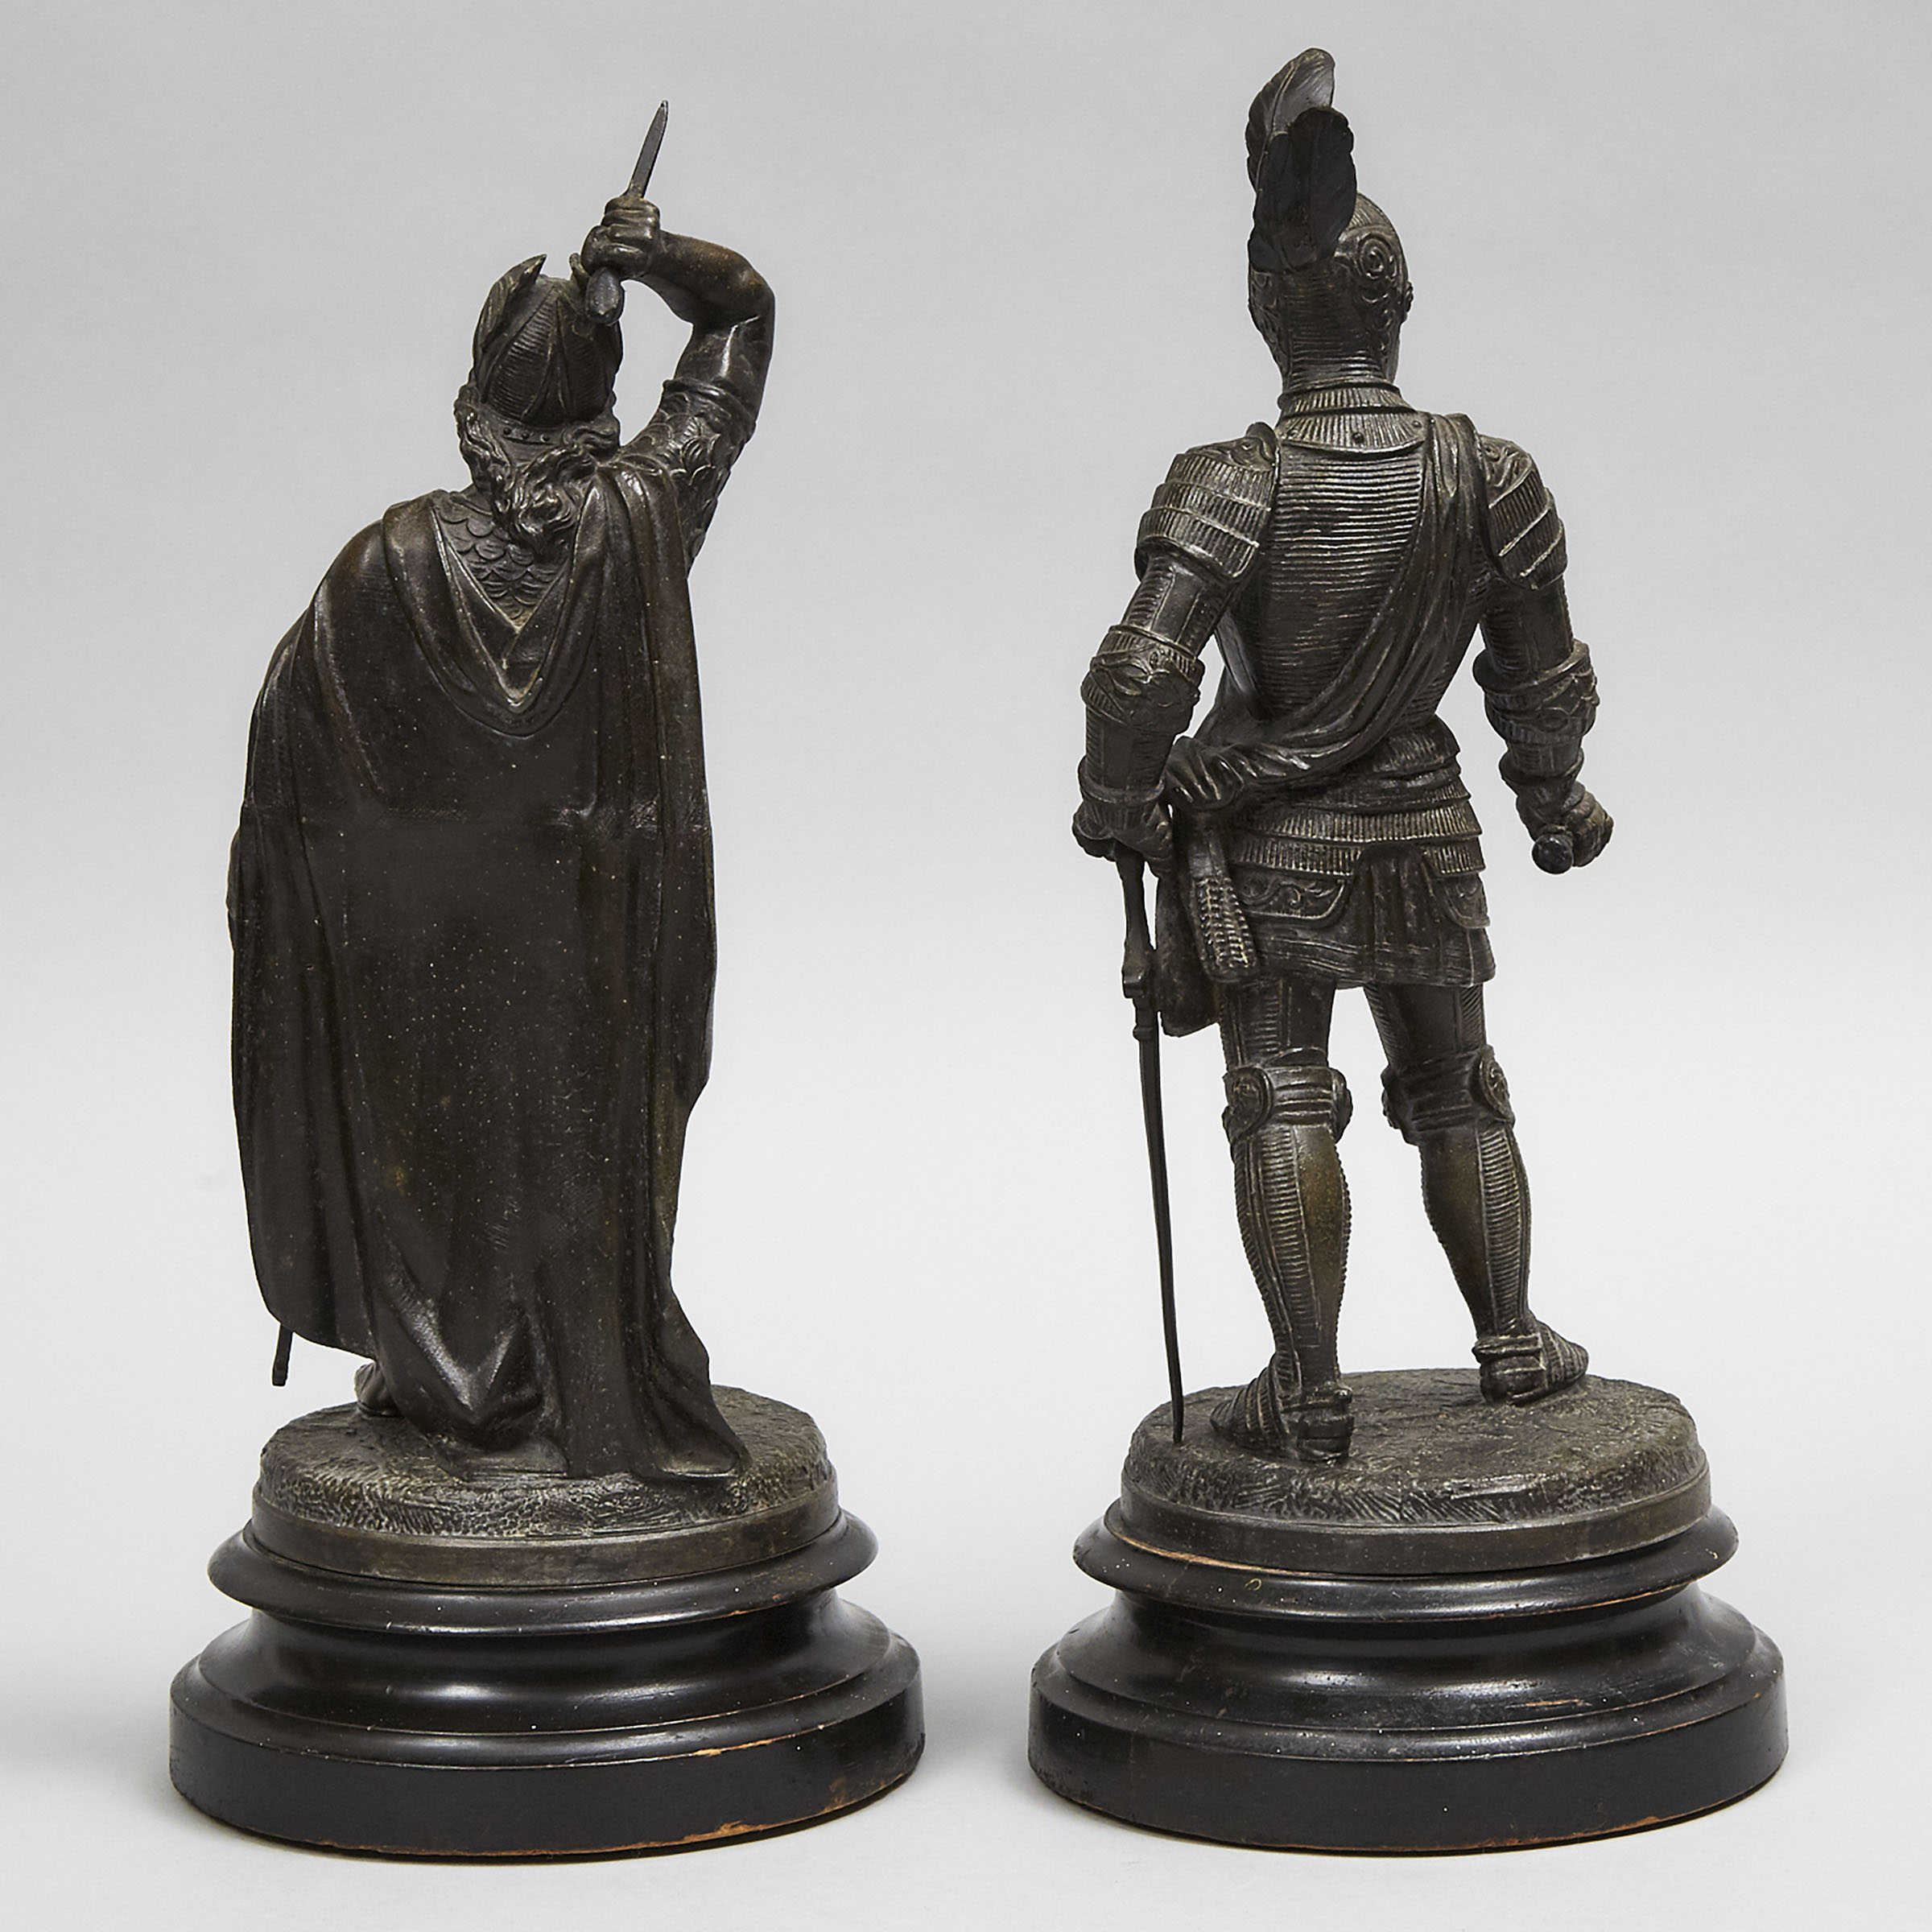 Pair of Victorian Bronzed Metal Figures of Mediaeval Knights, 19th century